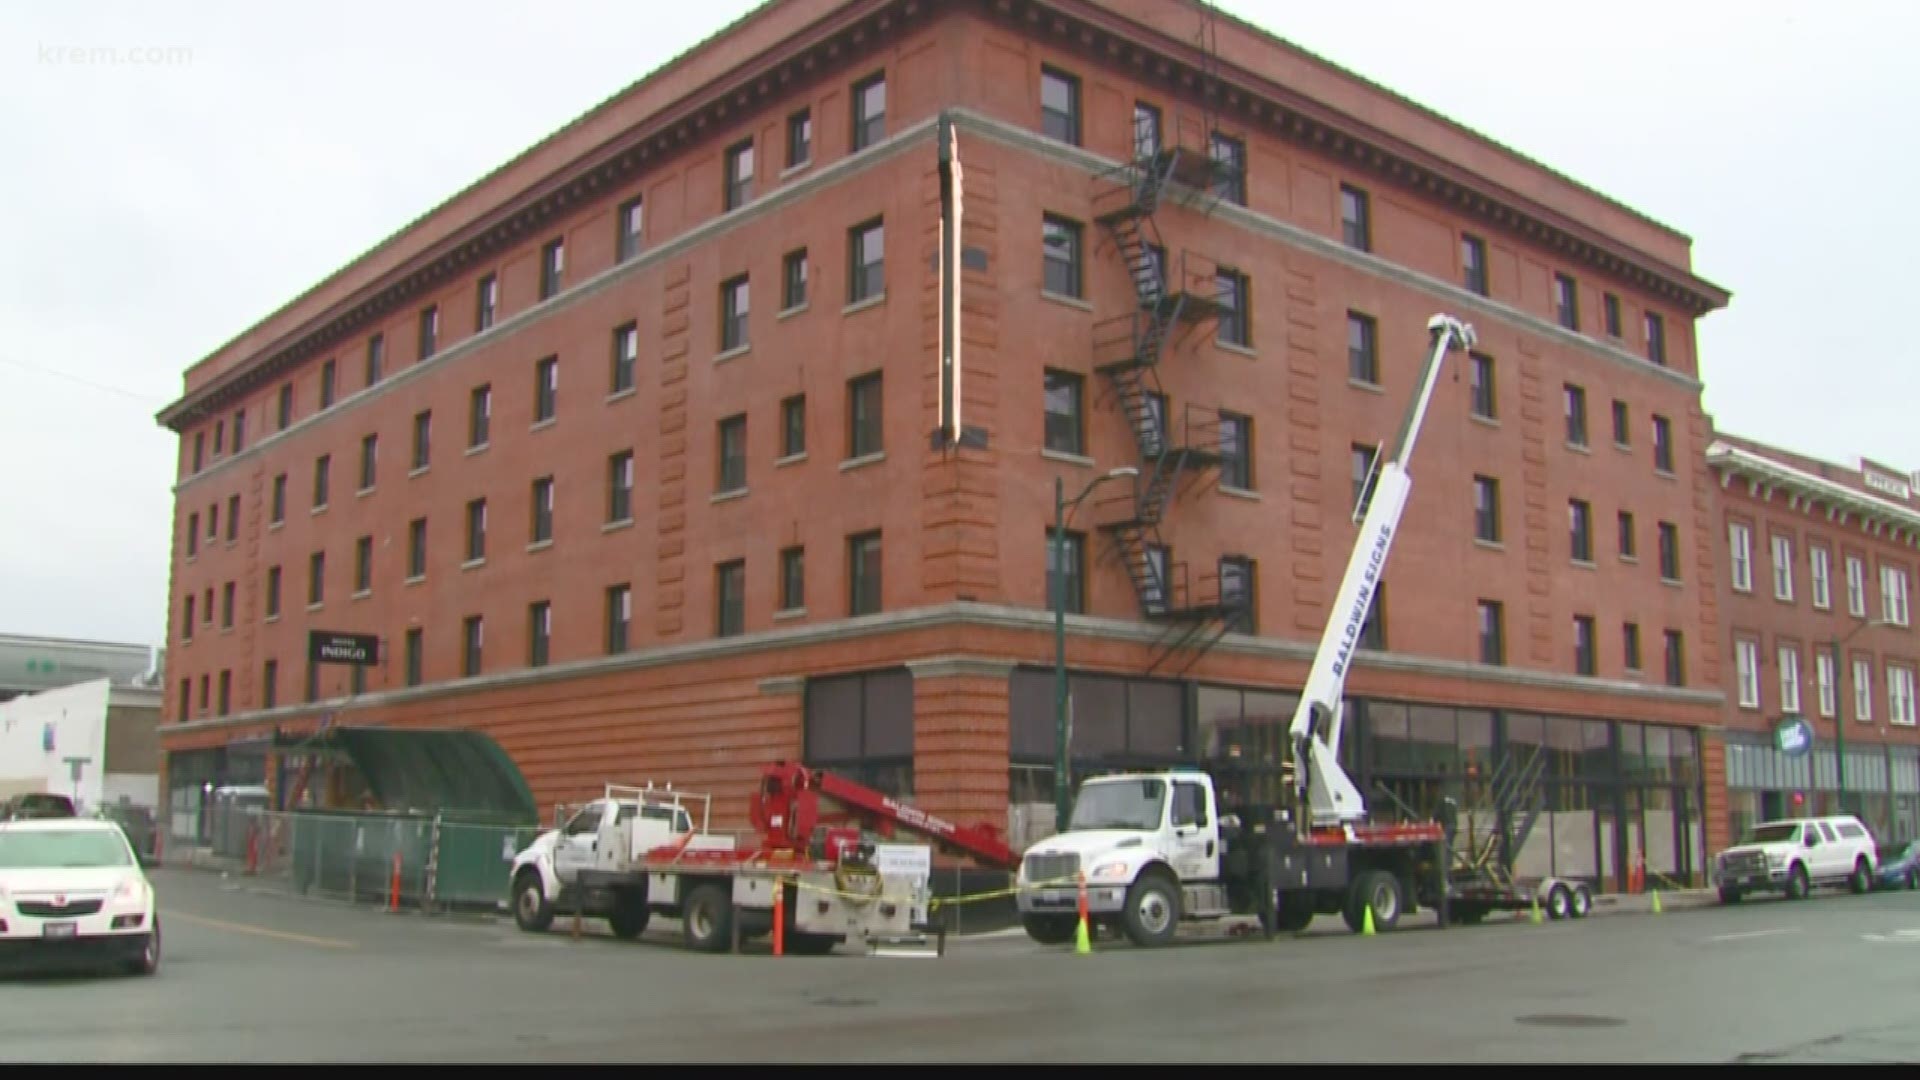 The renovated hotel in the west-end of downtown Spokane was expected to open in mid-April, but restrictions from Gov. Inslee’s Stay-Home halted construction.